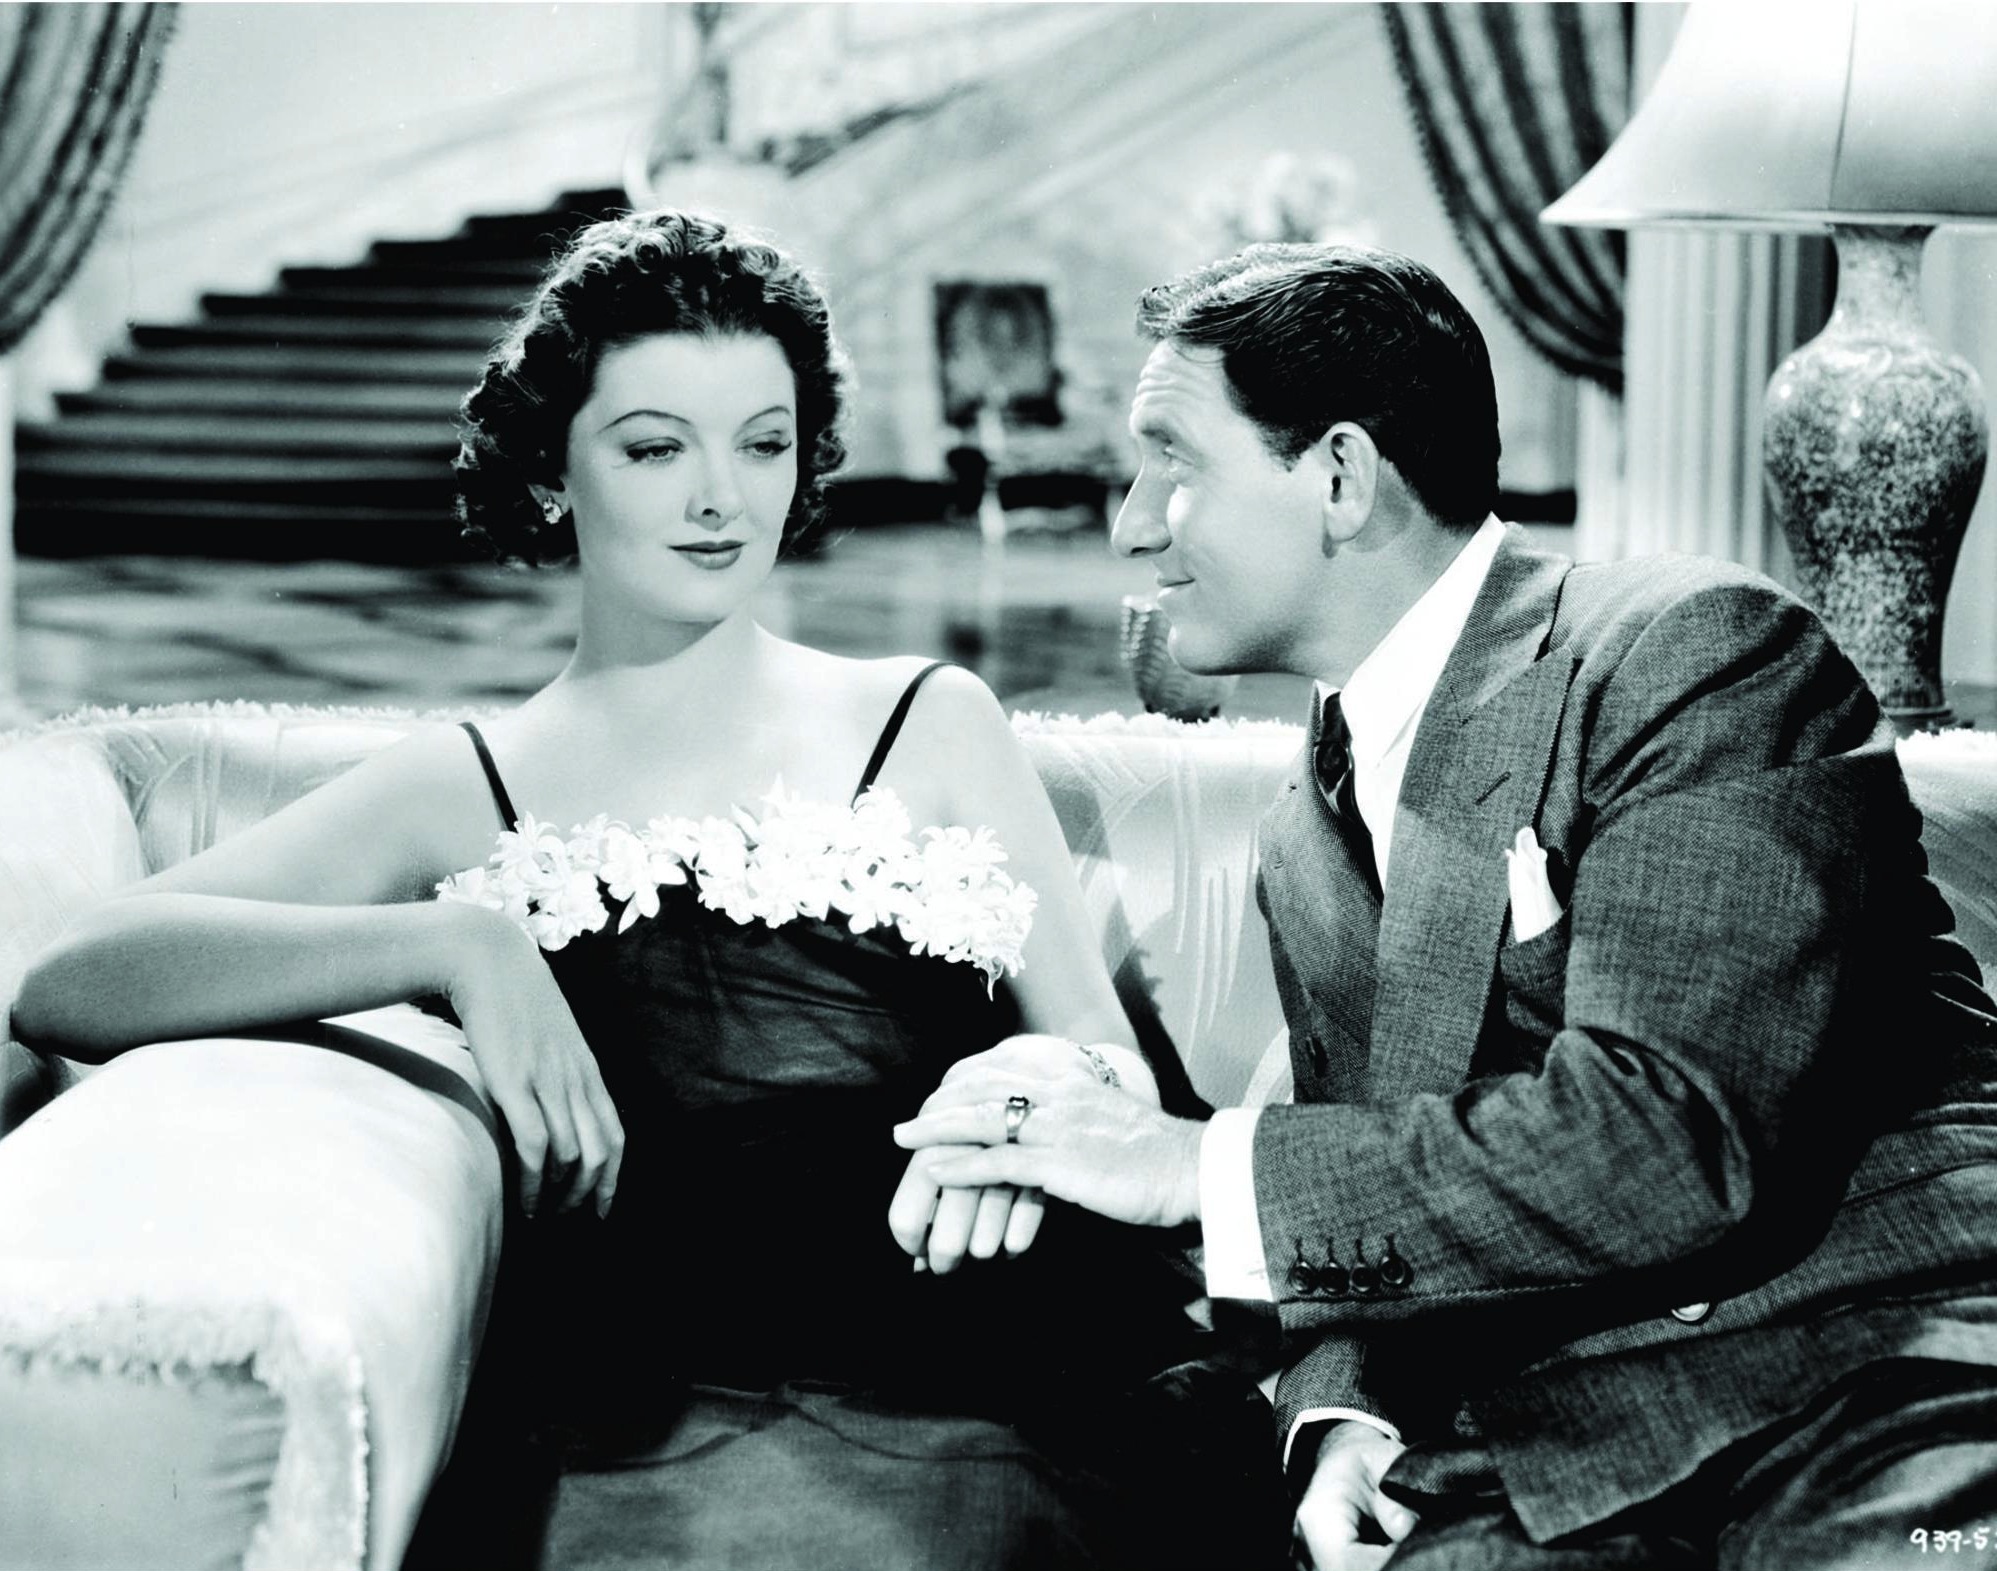 Still of Spencer Tracy and Myrna Loy in Libeled Lady (1936)